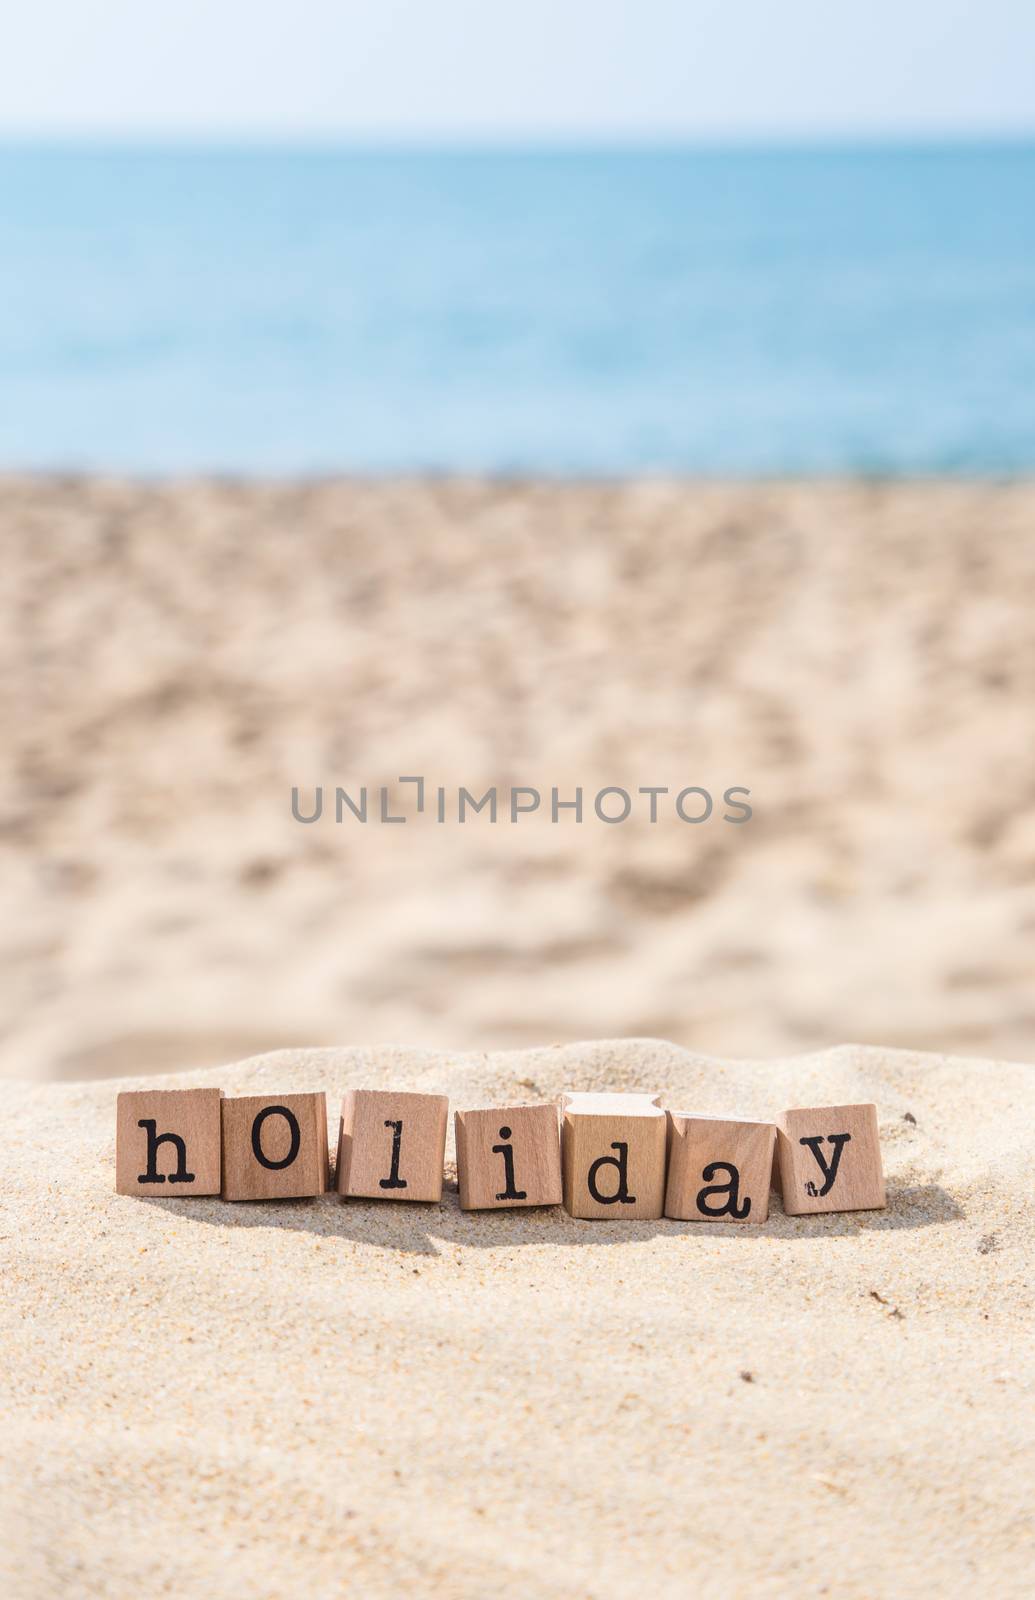 Holiday word on wood rubber stamps stack on the sand beach for vacation and summer season concept, beautiful sea view during daytime on a sunny day with blue sky on background